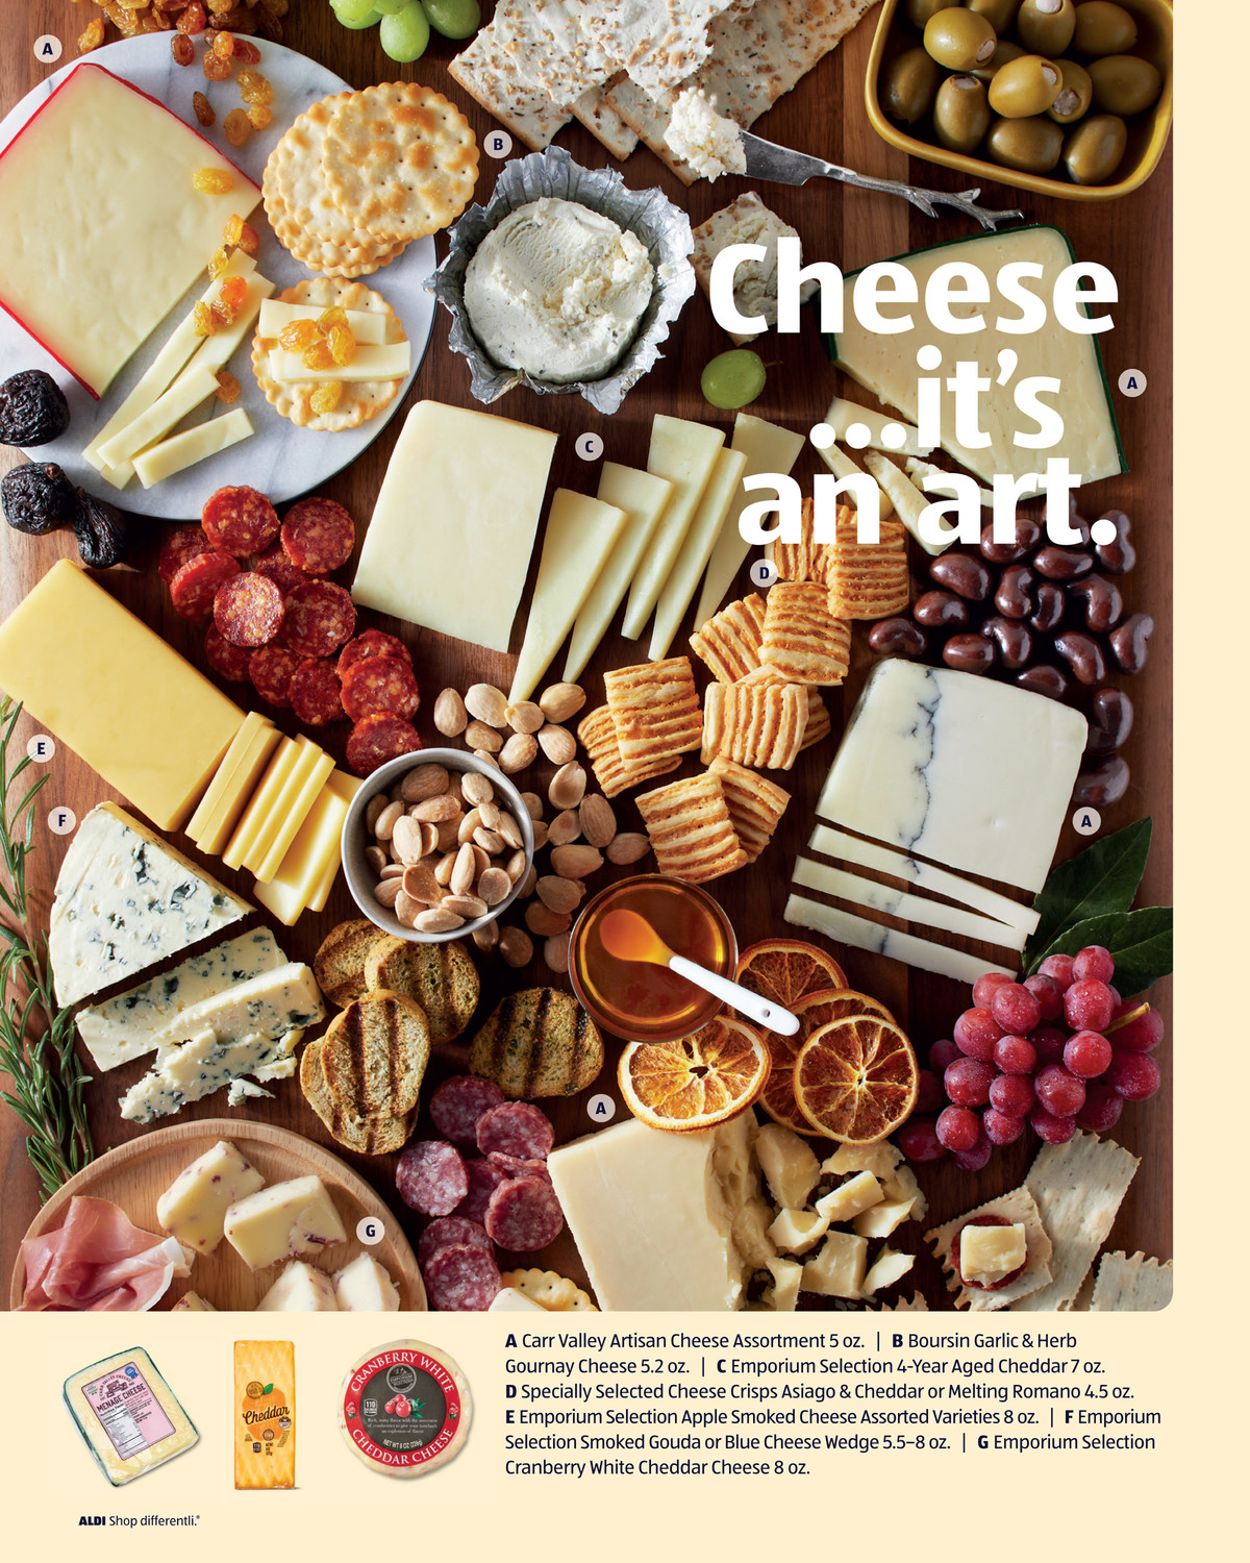 ALDI Current weekly ad 10/21 - 11/26/2020 [4] - frequent-ads.com